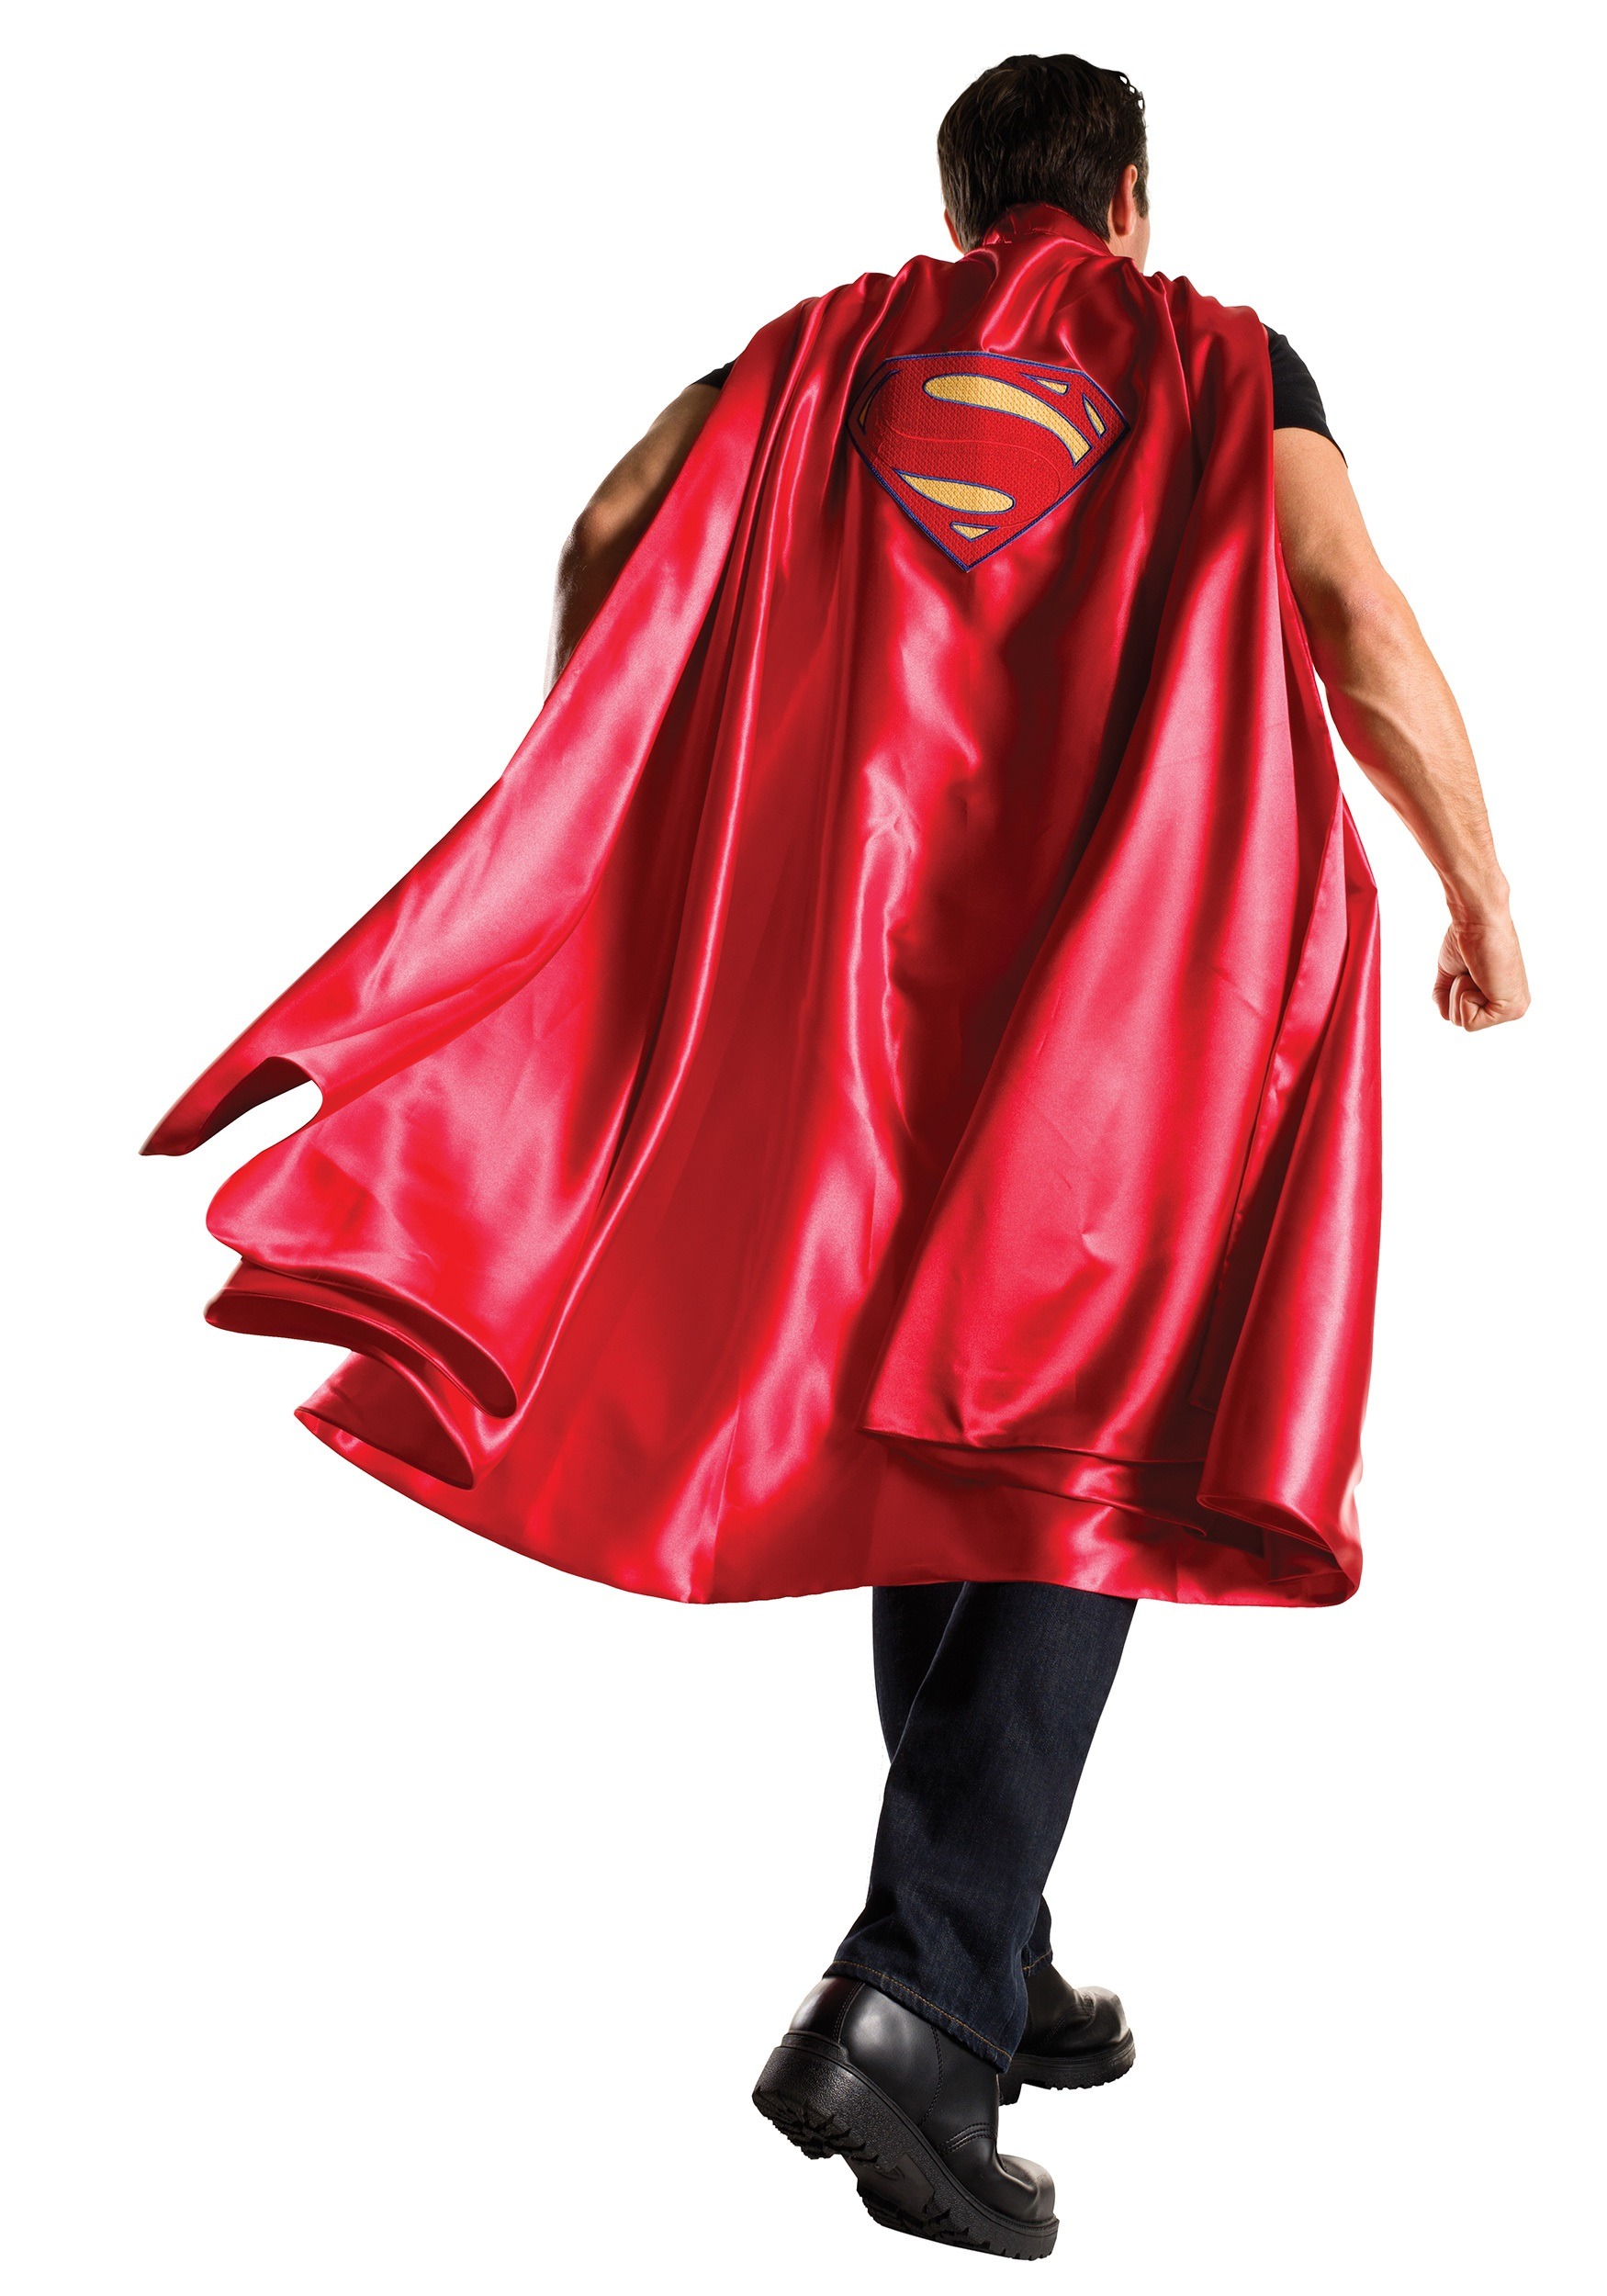 Get The Dawn Of Justice Adult Deluxe Superman Cape From Halloweencostumes Com Now Fandom Shop - superman cape roblox